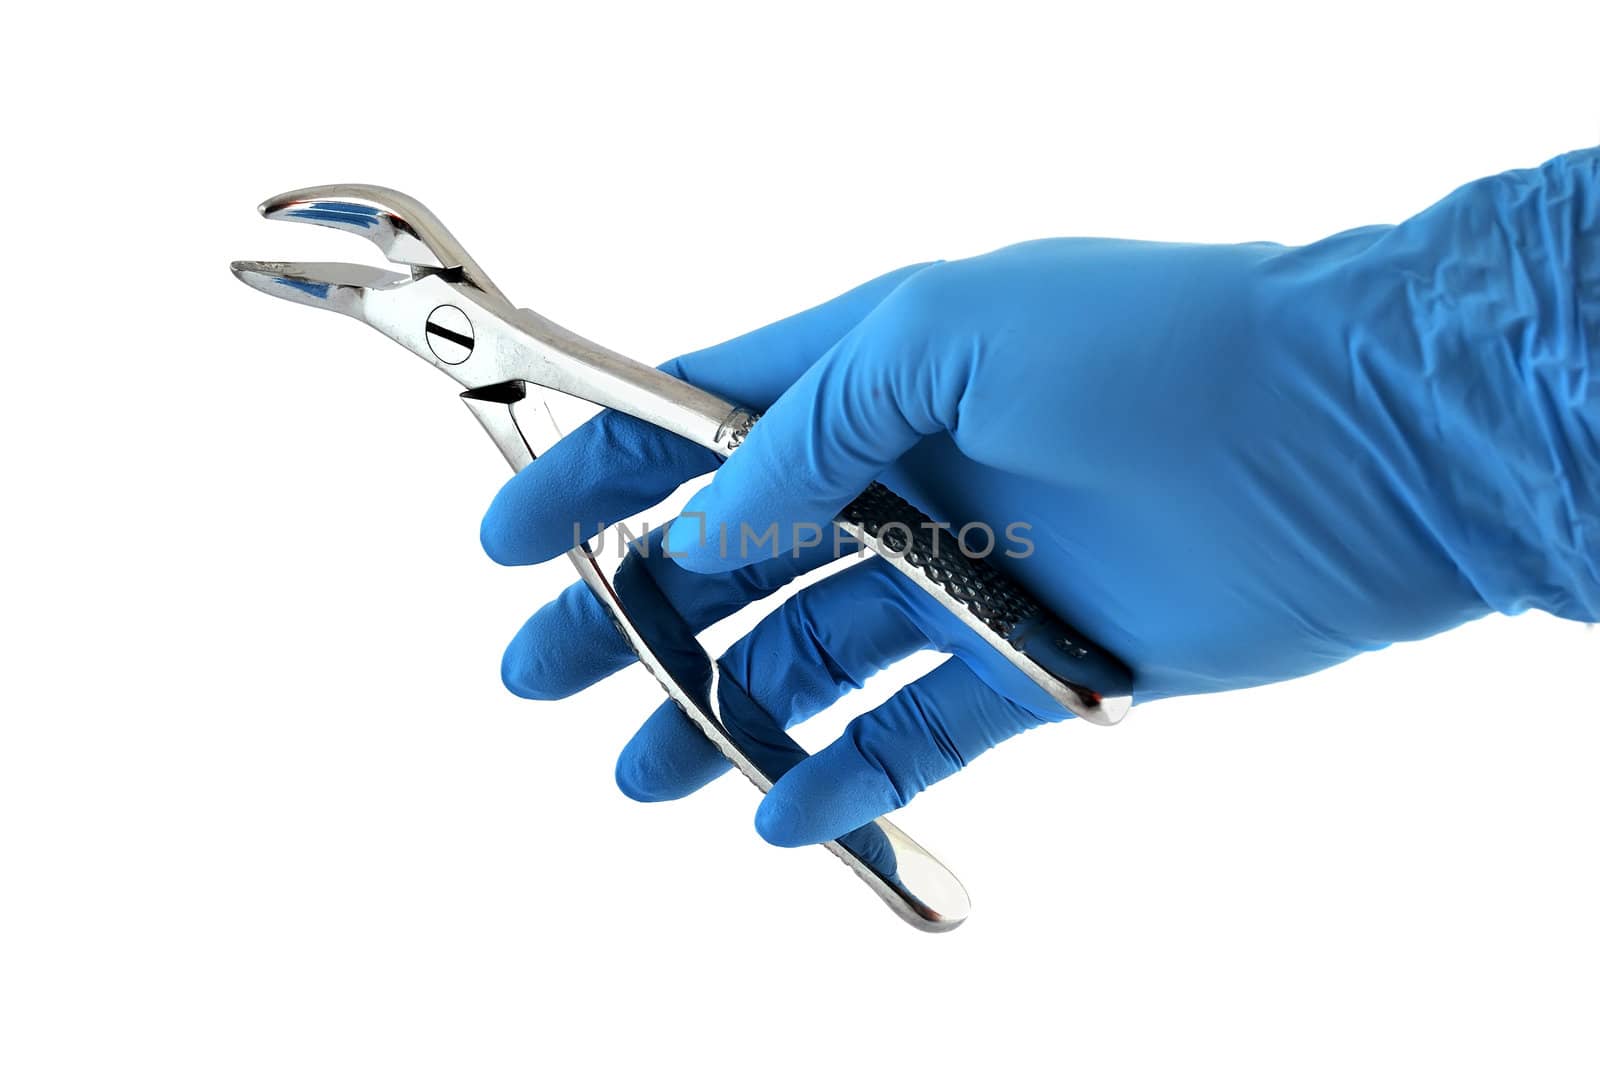 dental forceps in hand on a white background